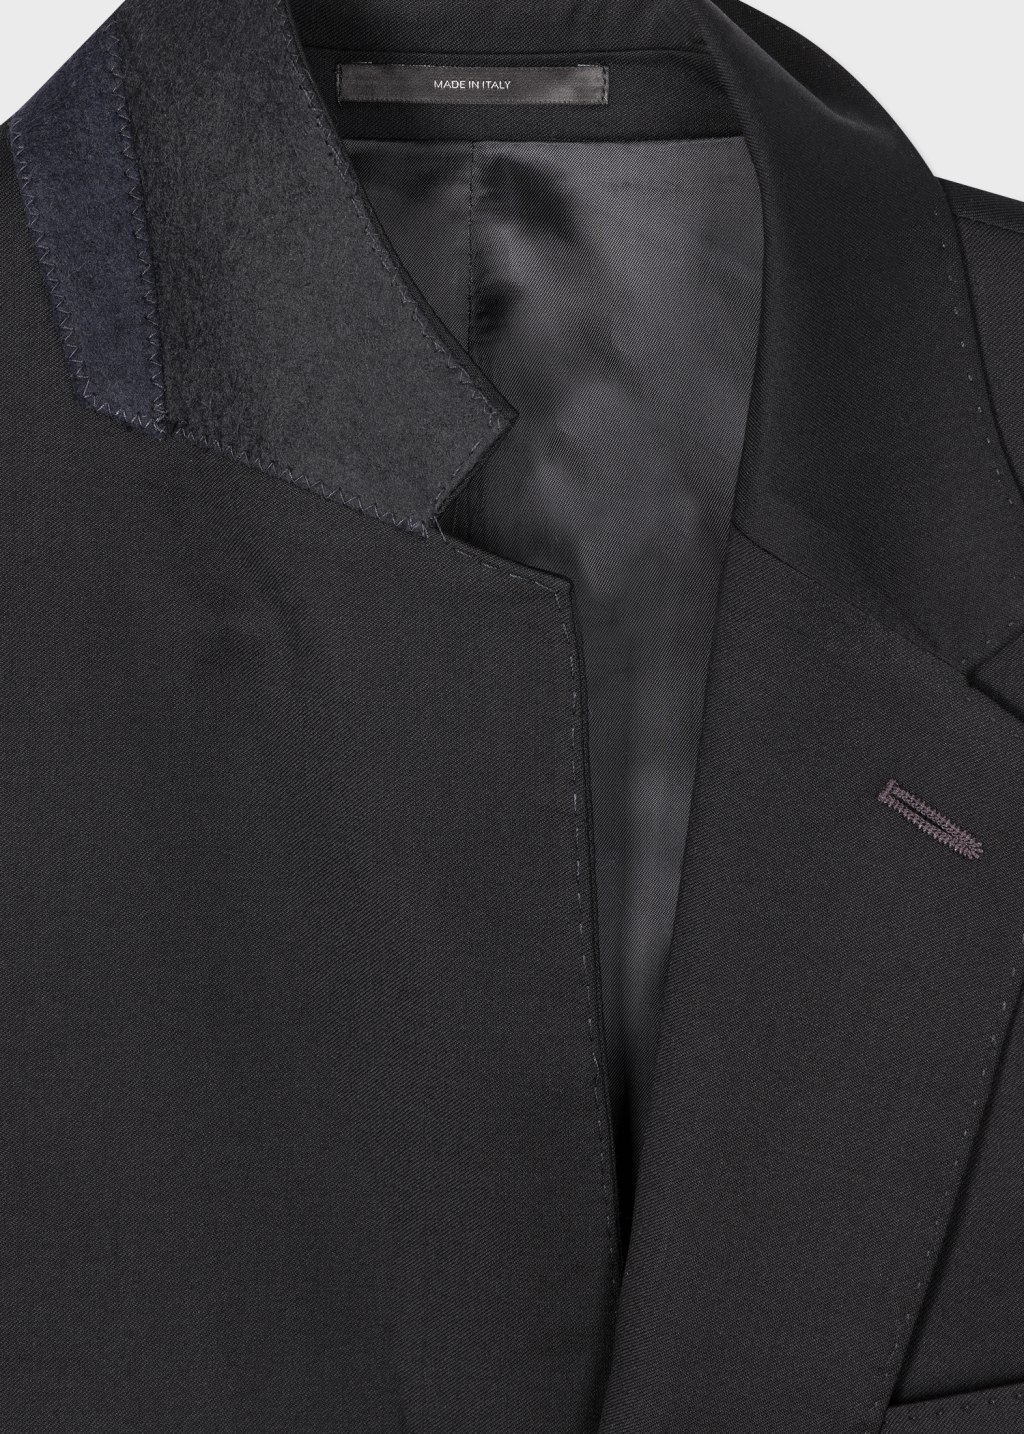 Product View - Tailored-Fit Black Wool Twill Two-Button Suit by Paul Smith